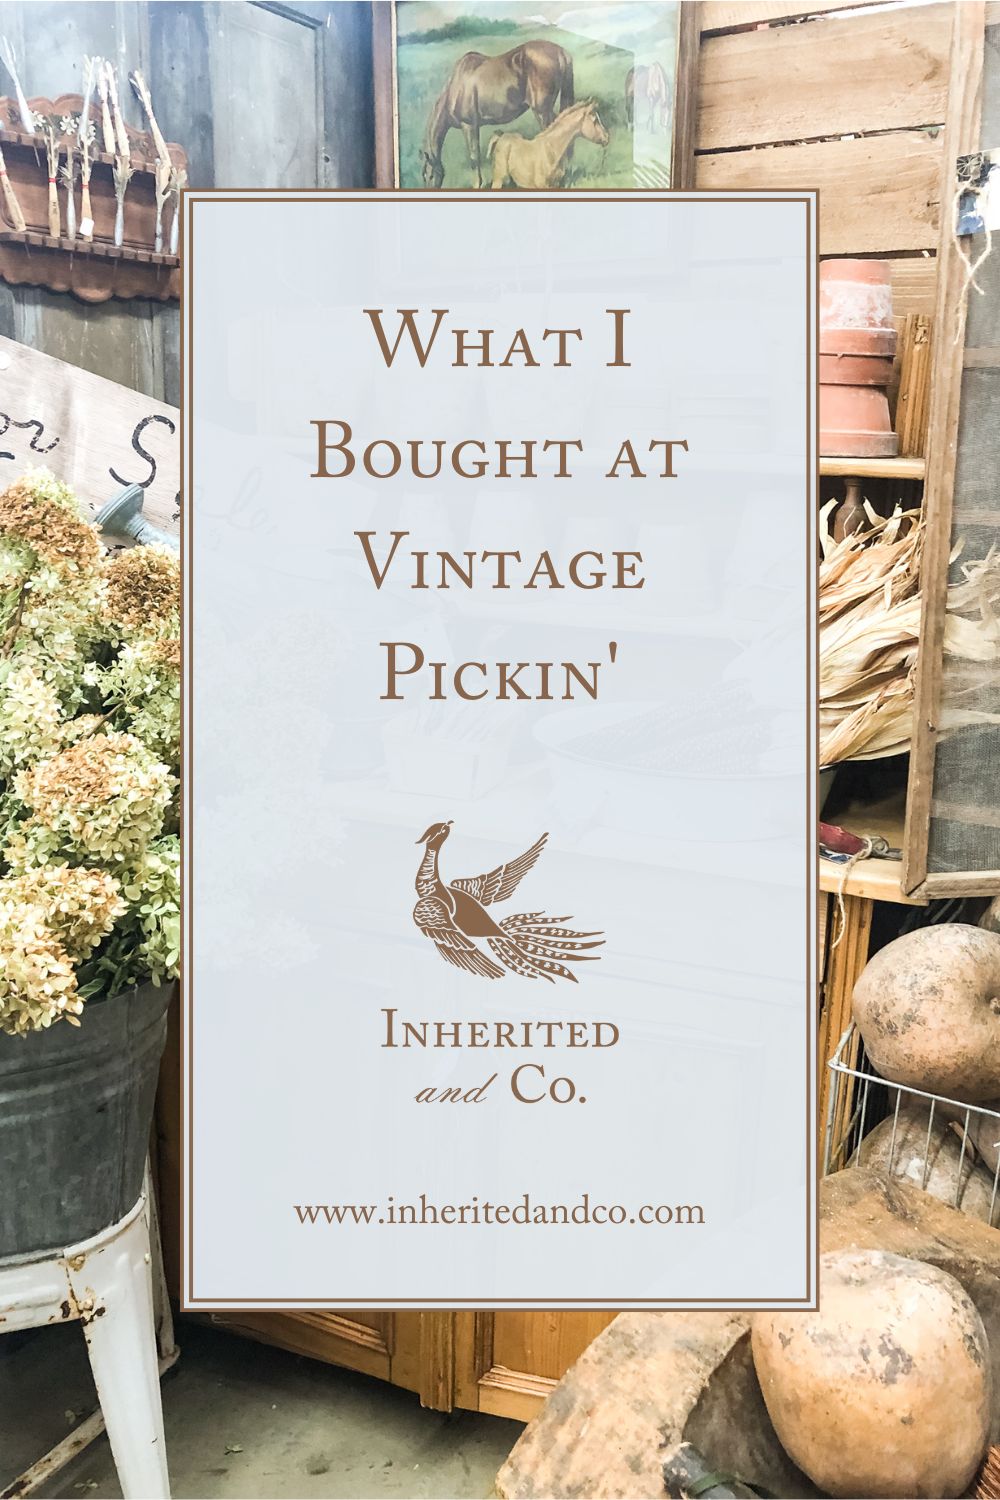 Pale blue graphic saying "What I Bought at Vintage Pickin'" featuring a pheasant logo for Inherited and Co. with all on top of a photo of a rustic antique vignette